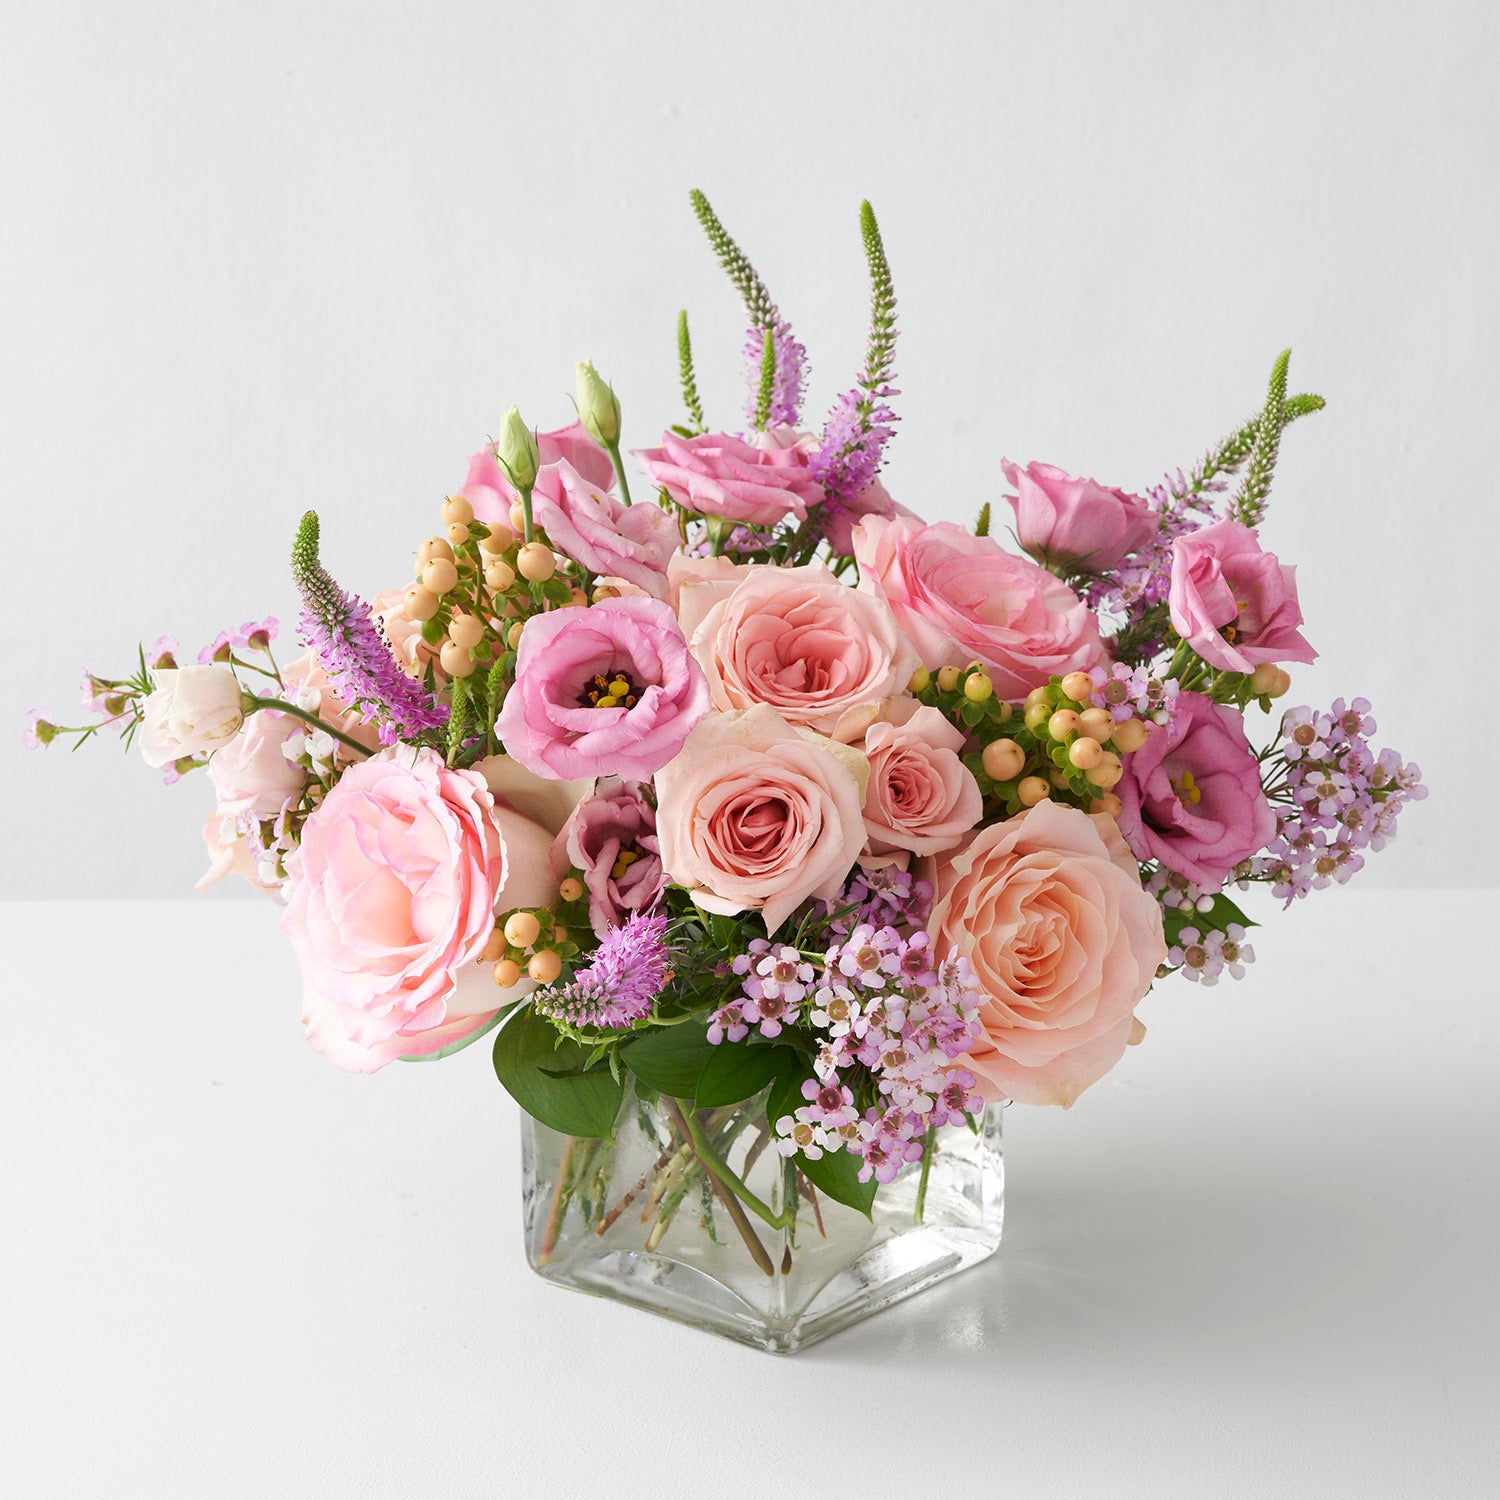 Arrangement of soft peachy roses, pink wax flower, pink lisianthus and pink veronica in glass cube centered on white background.